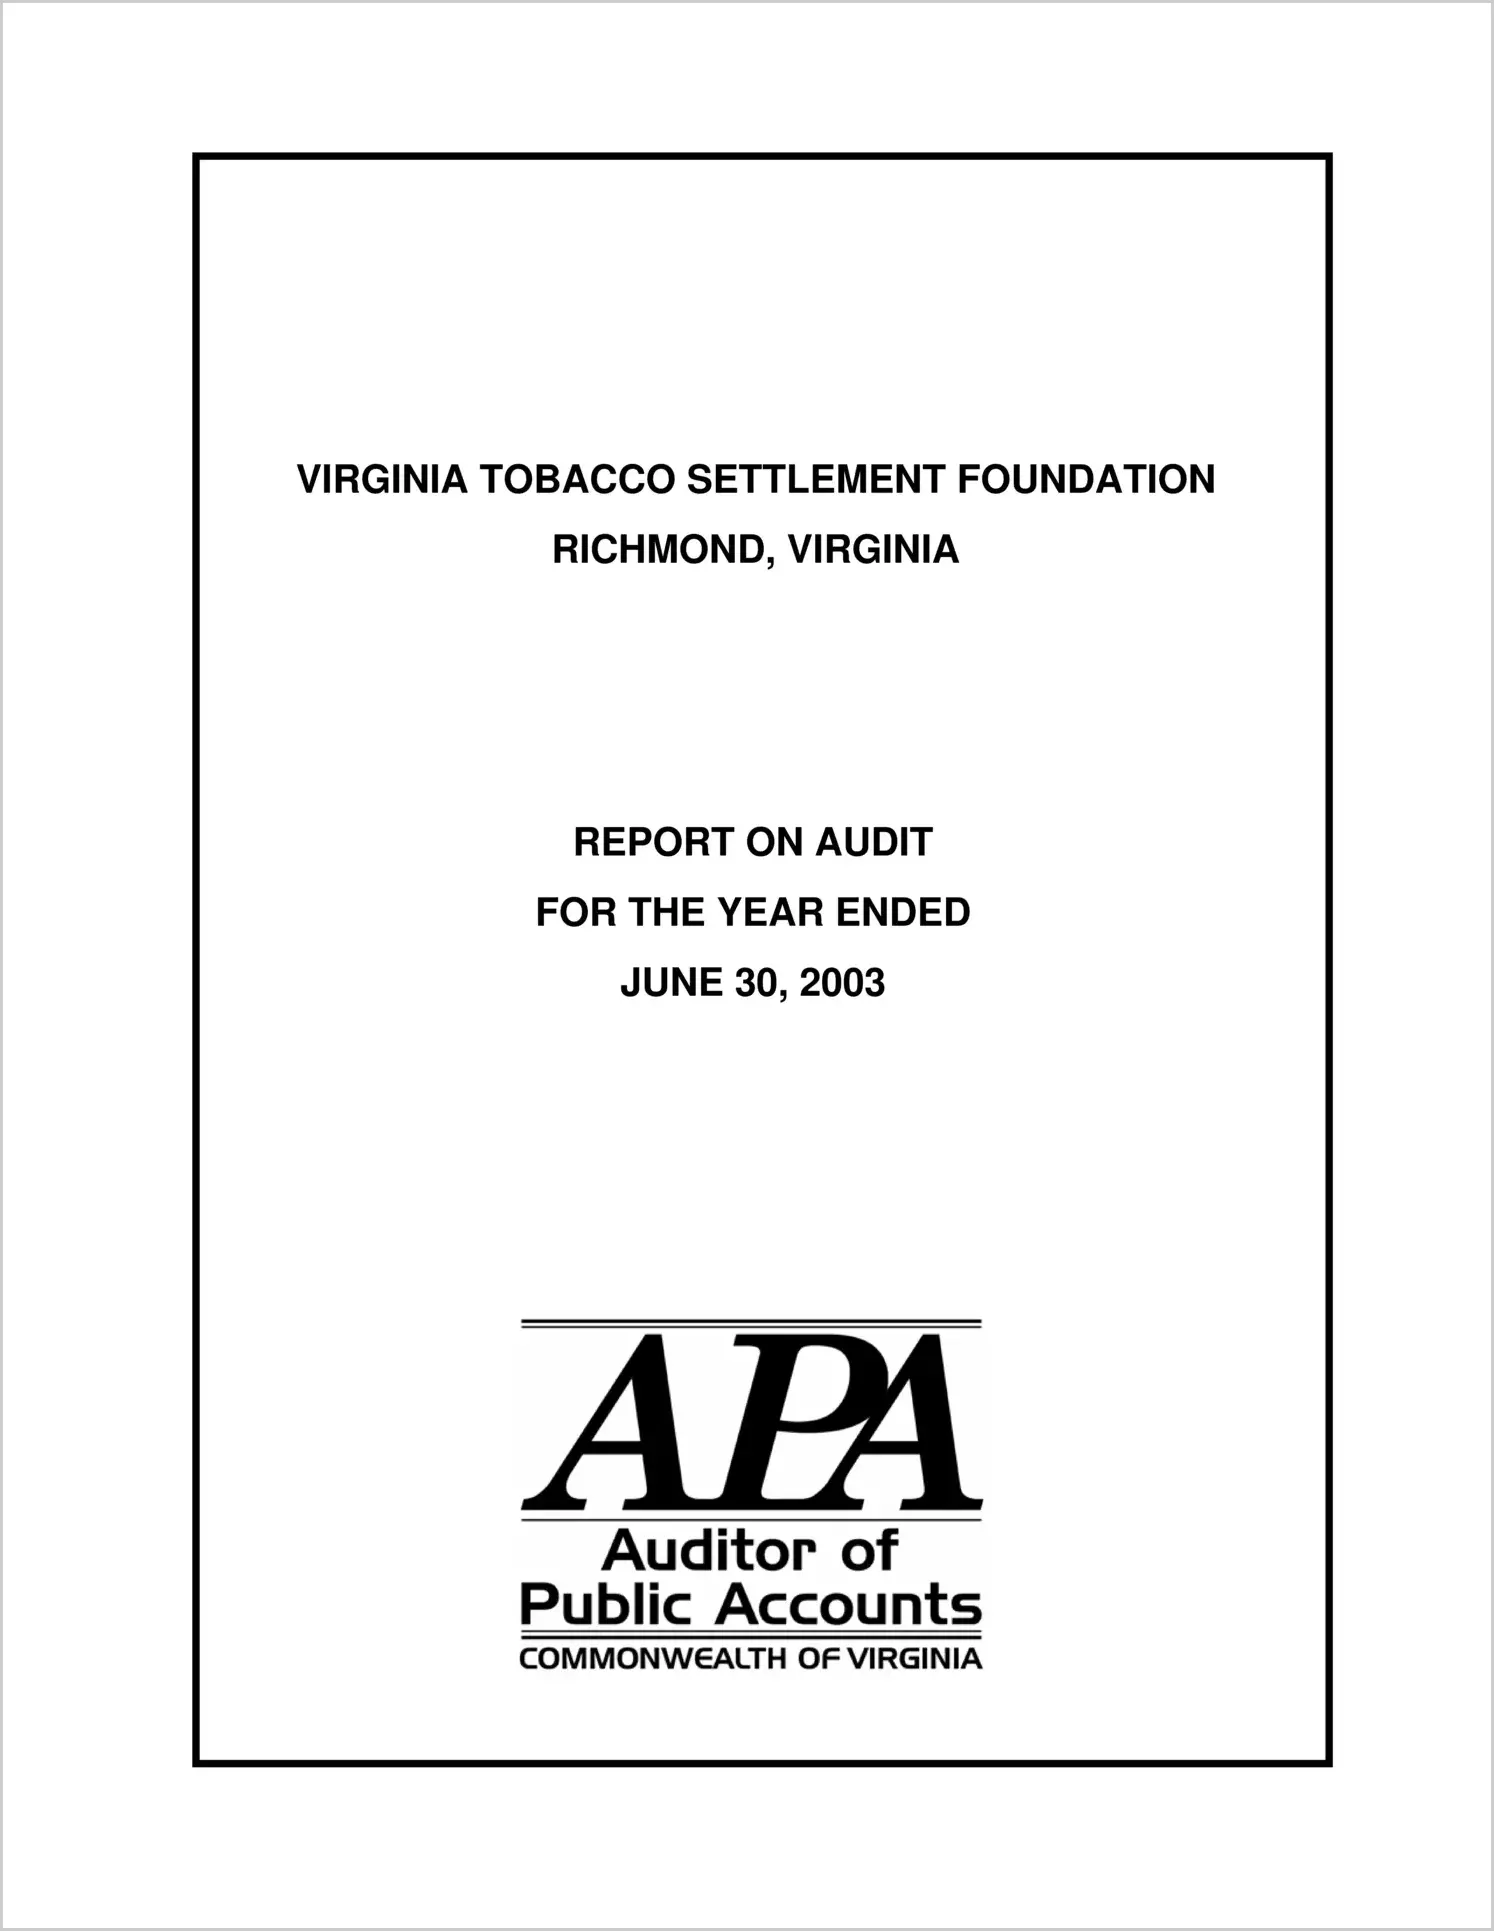 Virginia Tobacco Settlement Foundation for the year ended June 30, 2003